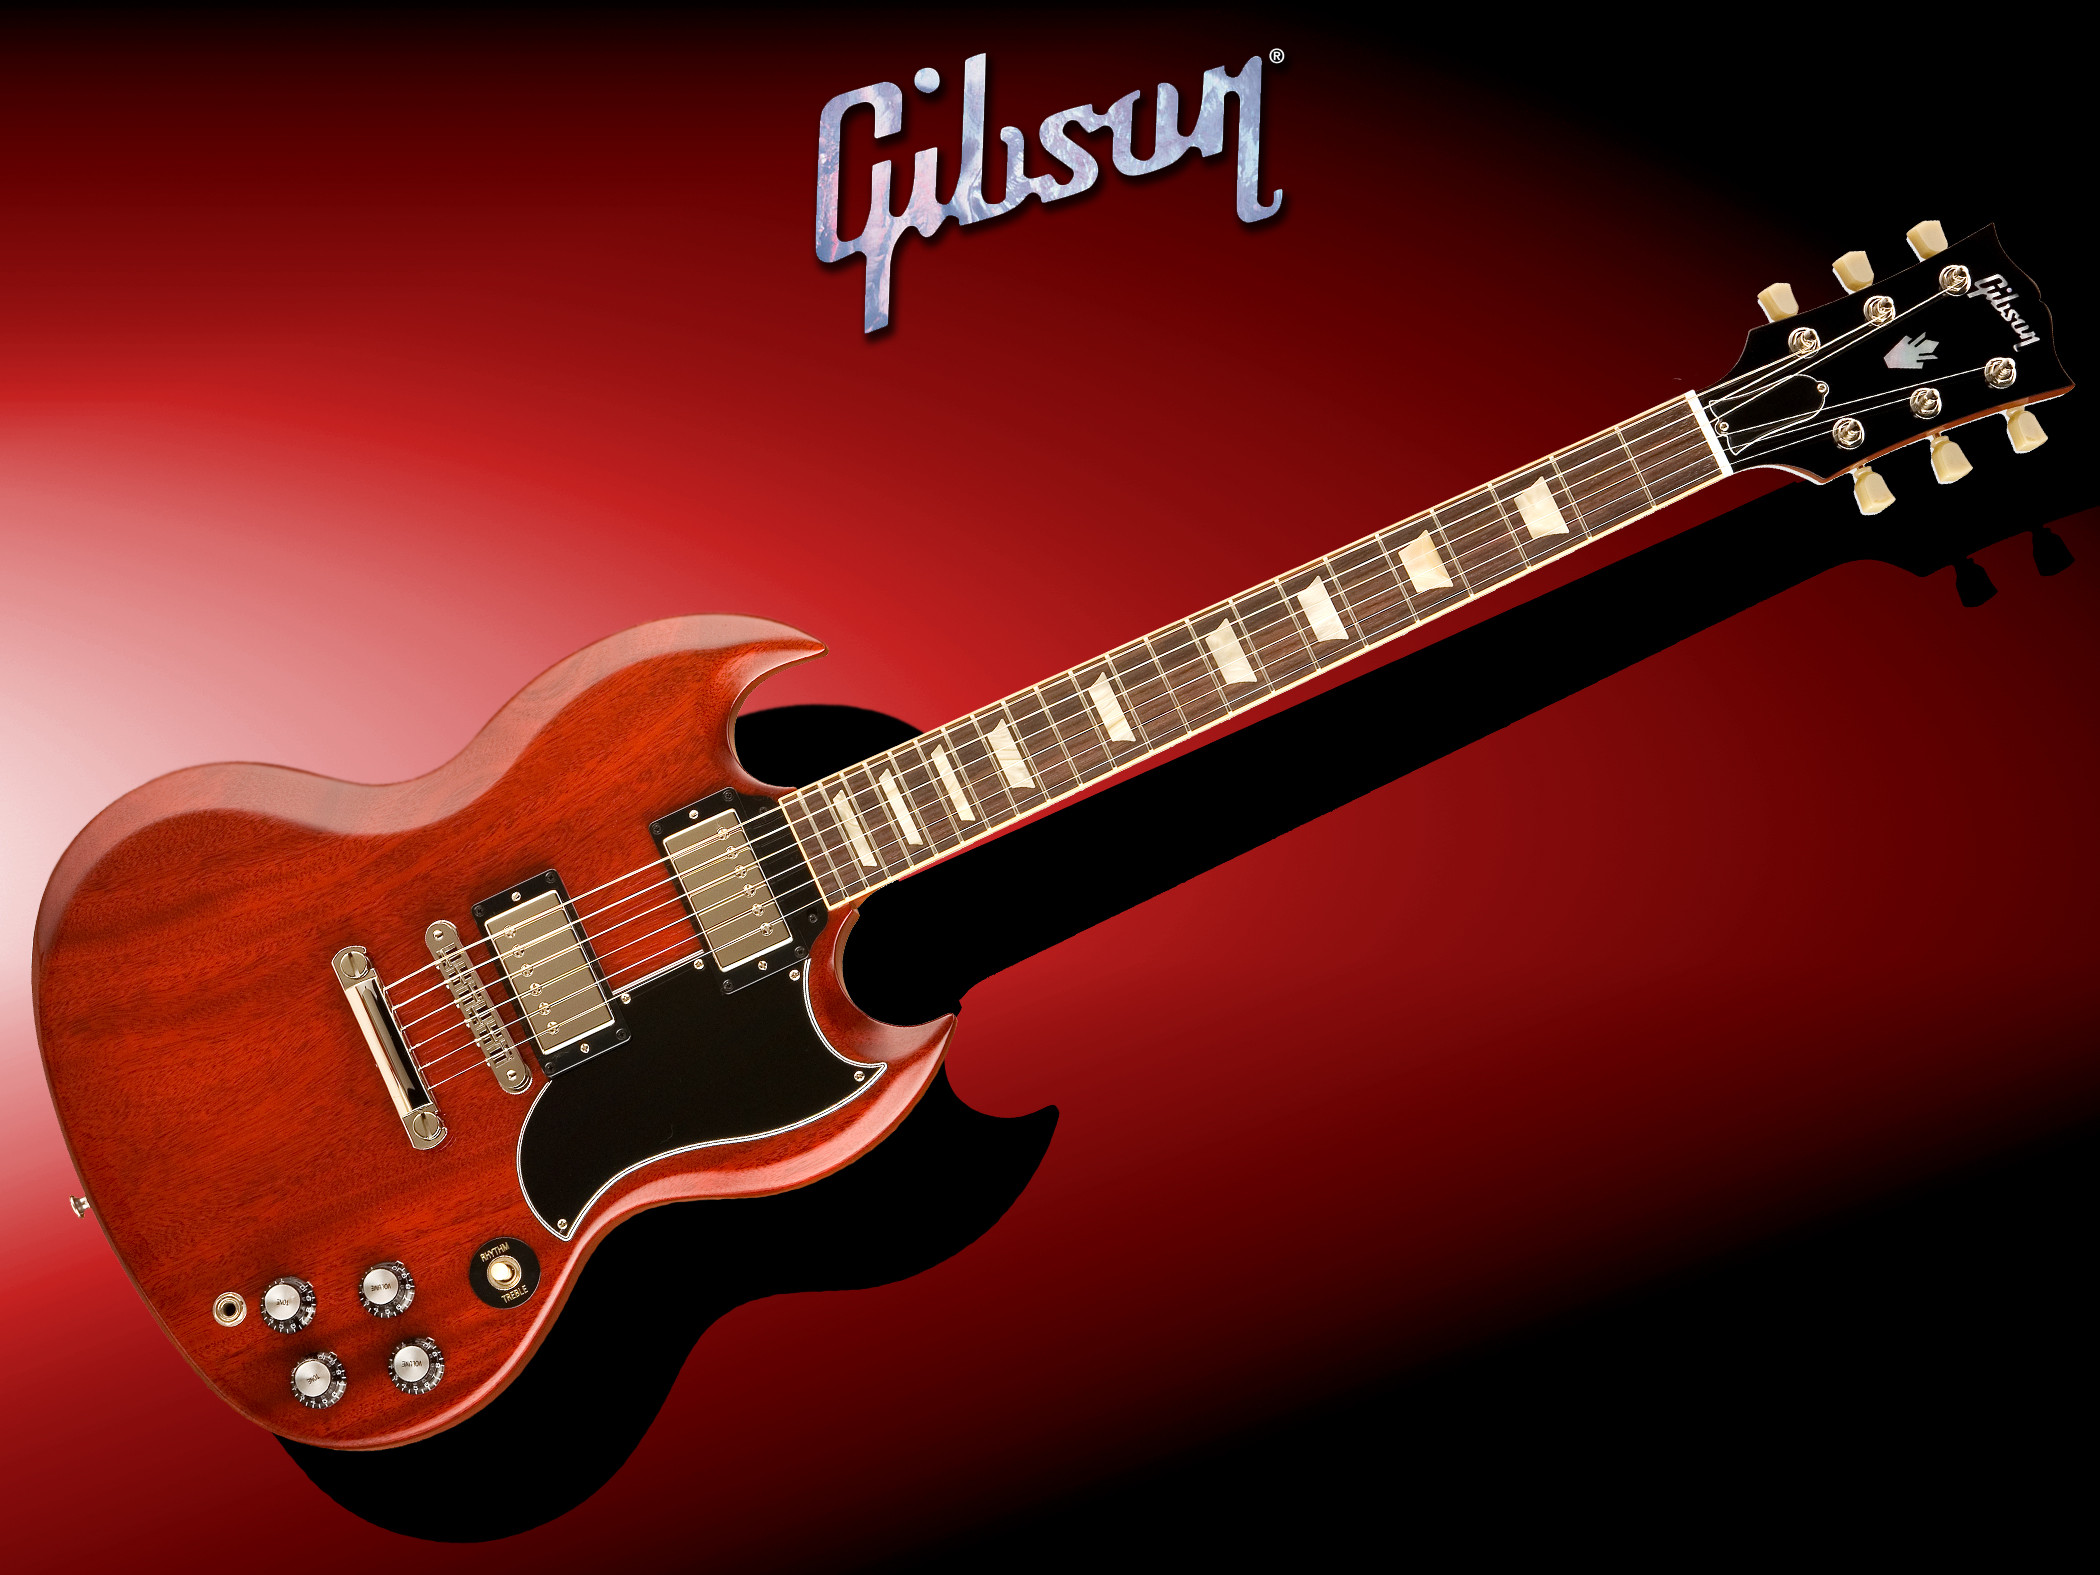 2100x1575 Gibson News & Lifestyle Landing Page Gibson Wallpapers - Wallpaper Cave ...